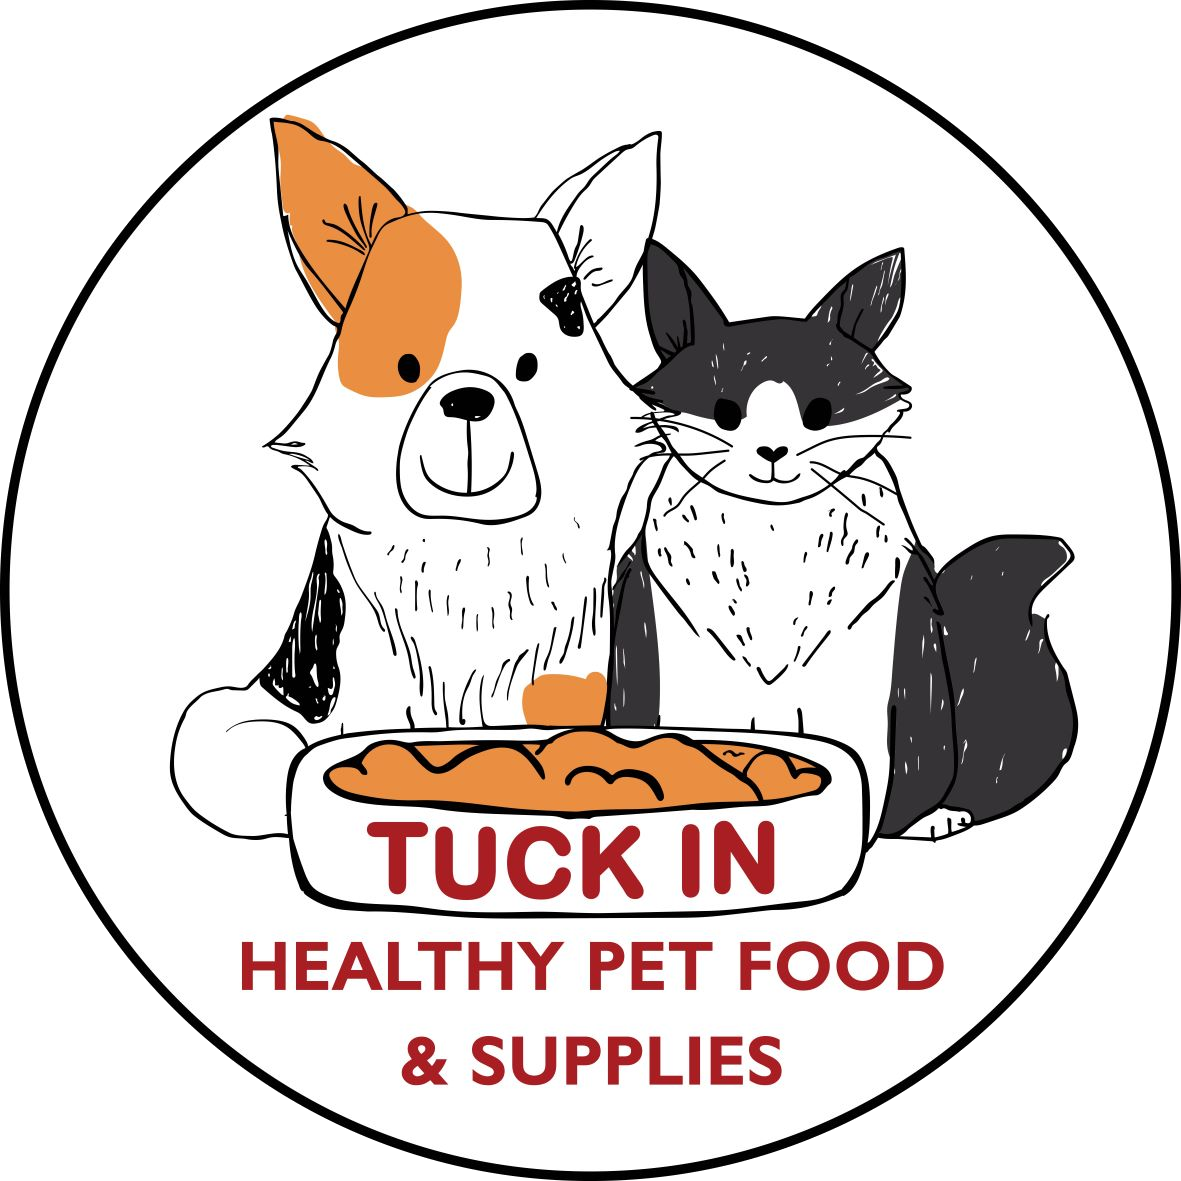 Tuck In Healthy Pet Food & Animal Natural Health Supplies